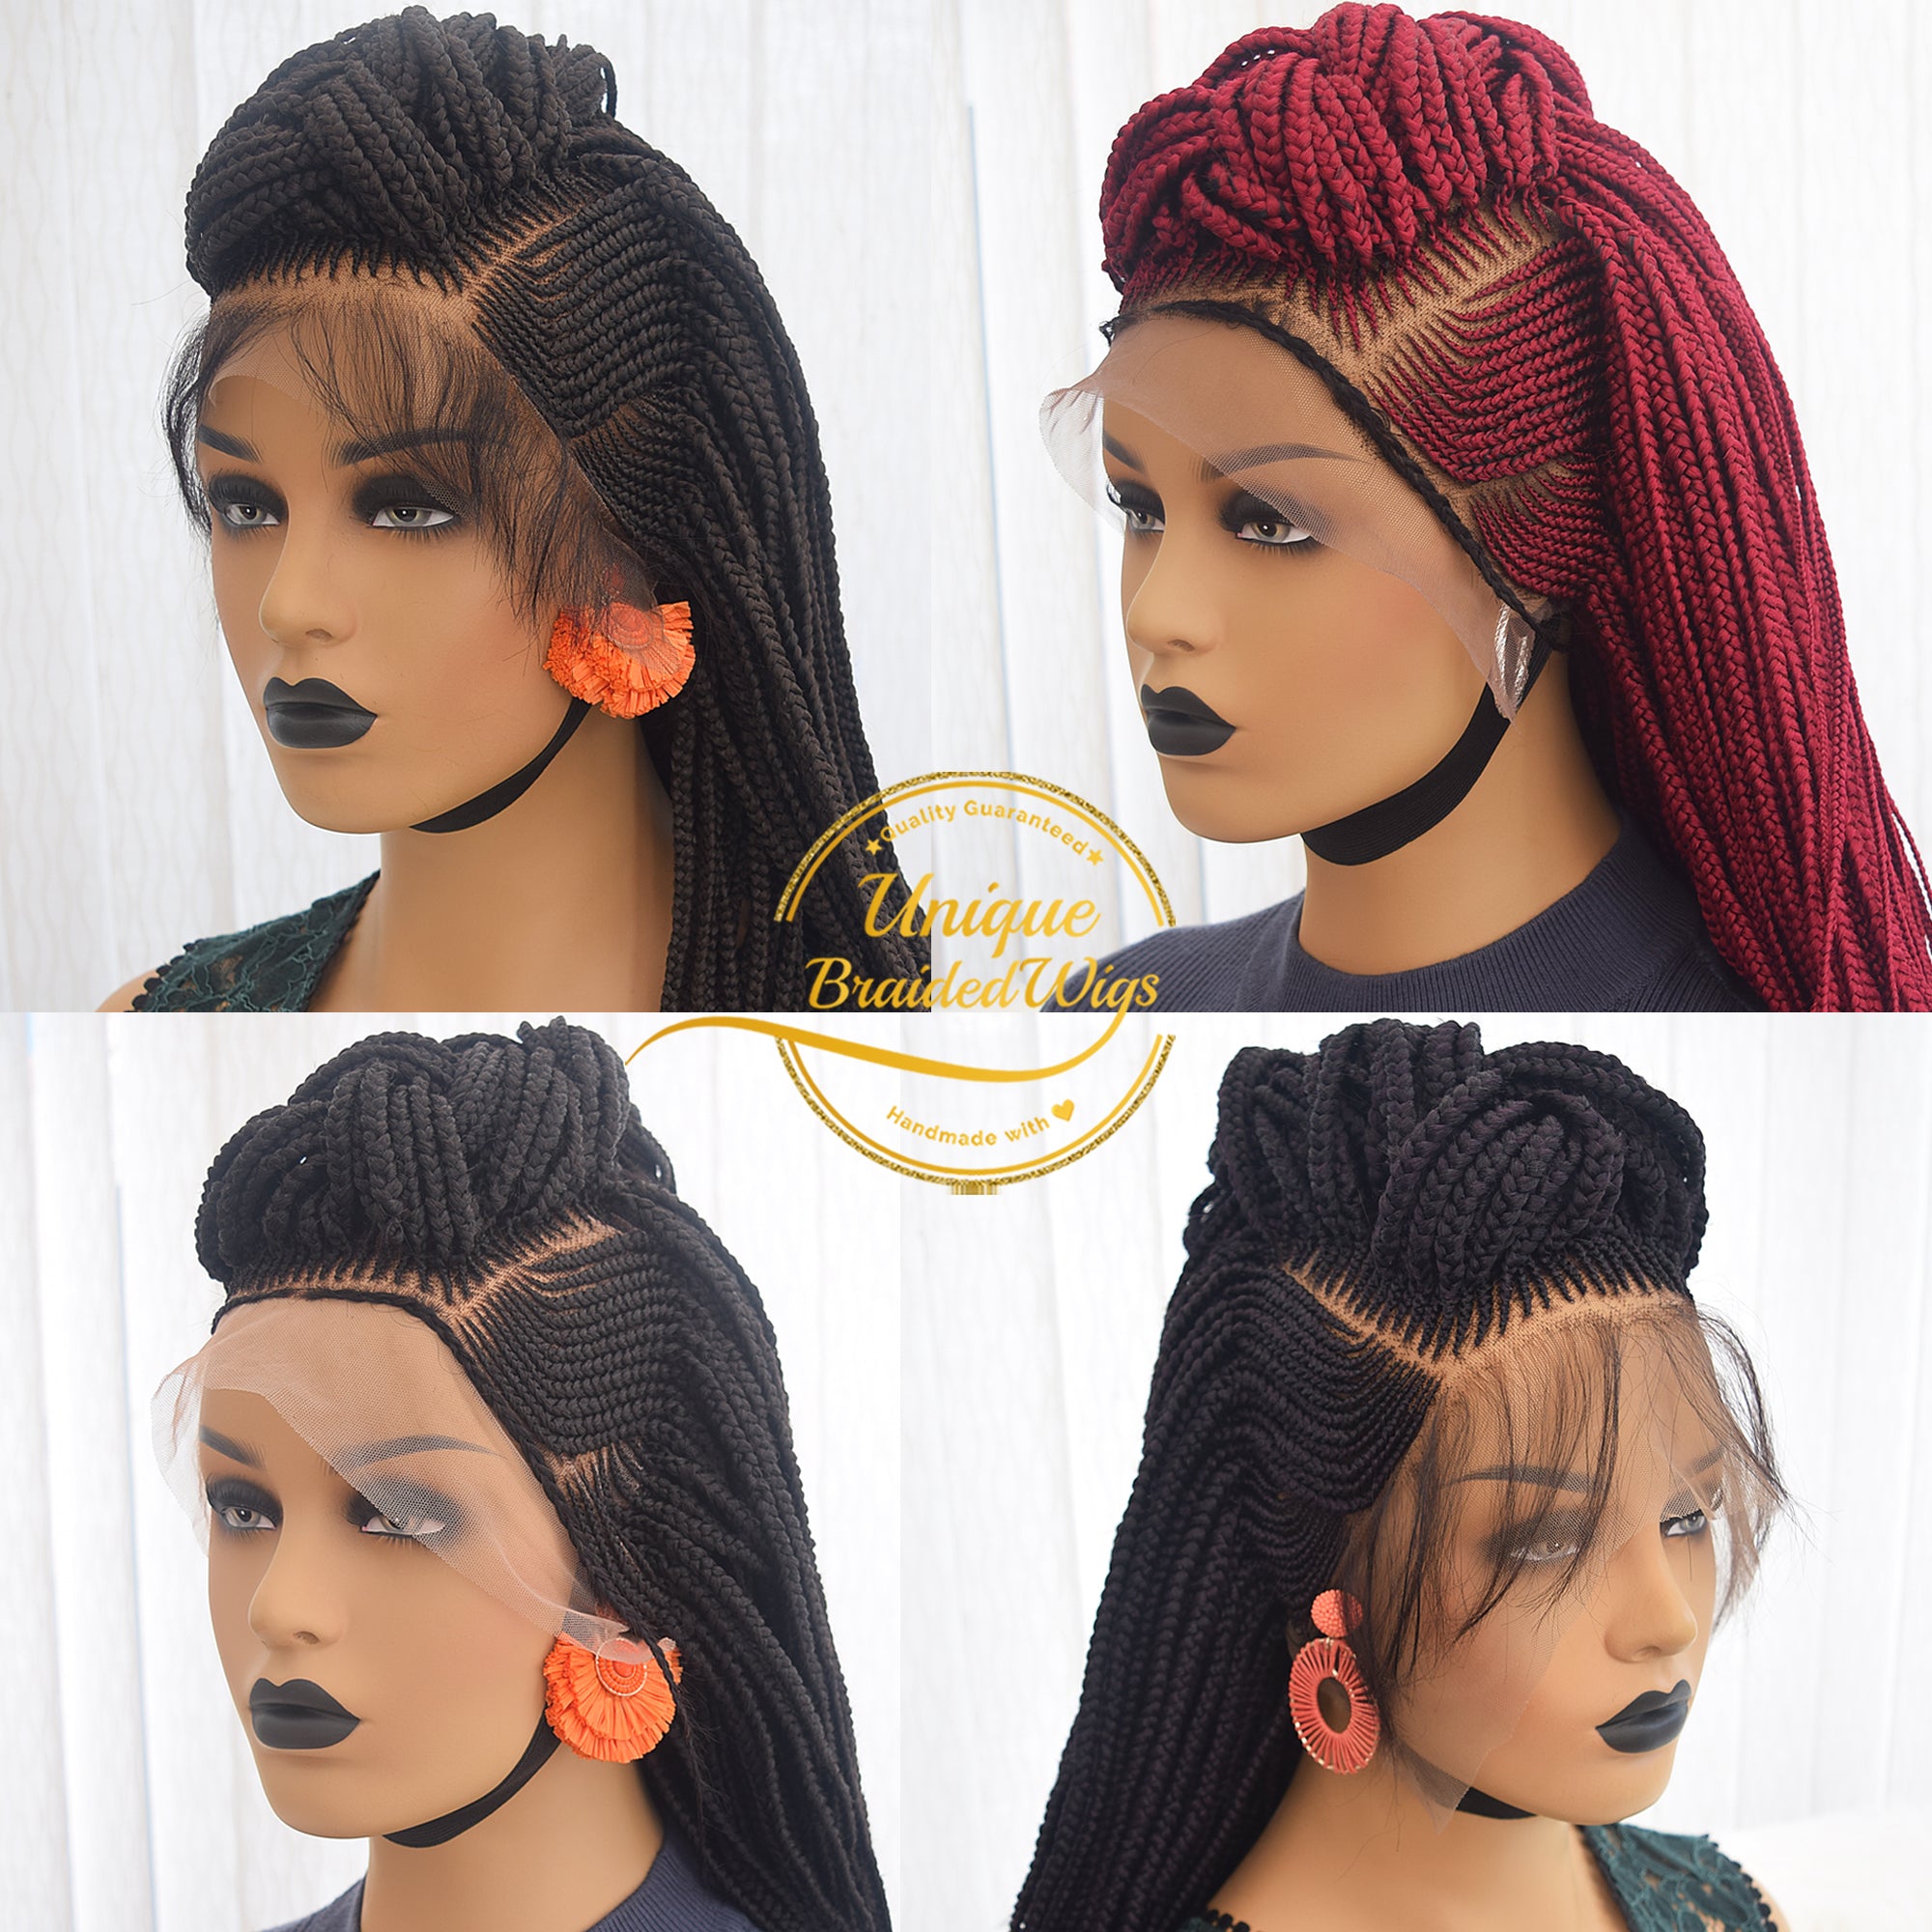 Lexqui 13X6X4 Inch Lace Front Knotless Box Braided Wigs with Boho